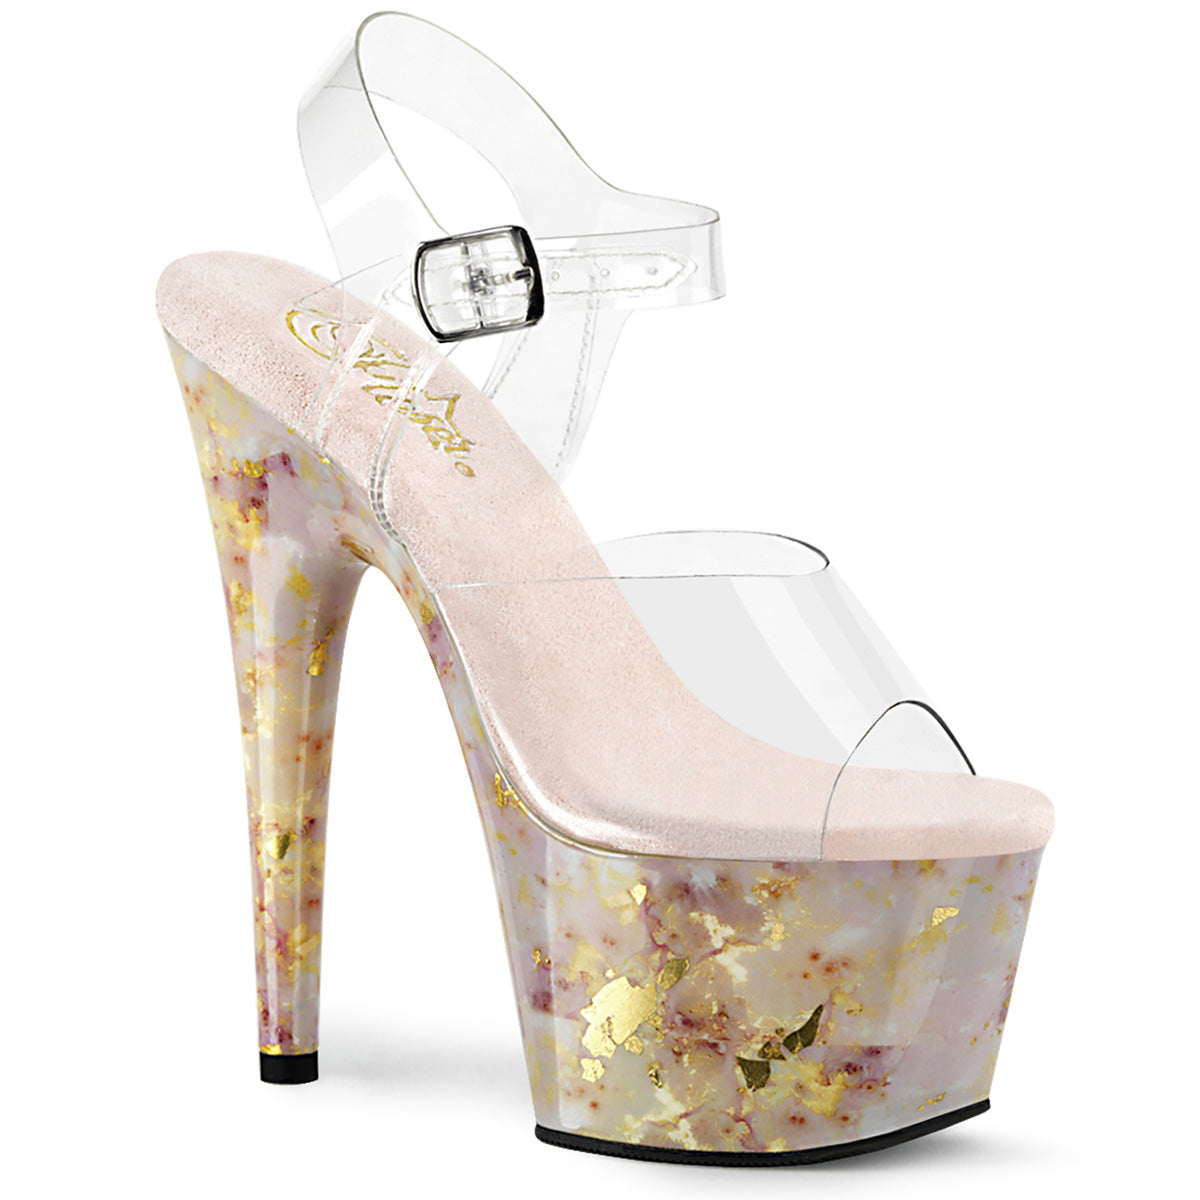 Pleaser ADORE-708MB Clear-Blush-Gold Marble 7 Inch (178mm) Heel, 2 3/4 Inch (70mm) Platform Ankle Strap Sandal Featuring Marble Effect Printed Platform Bottom